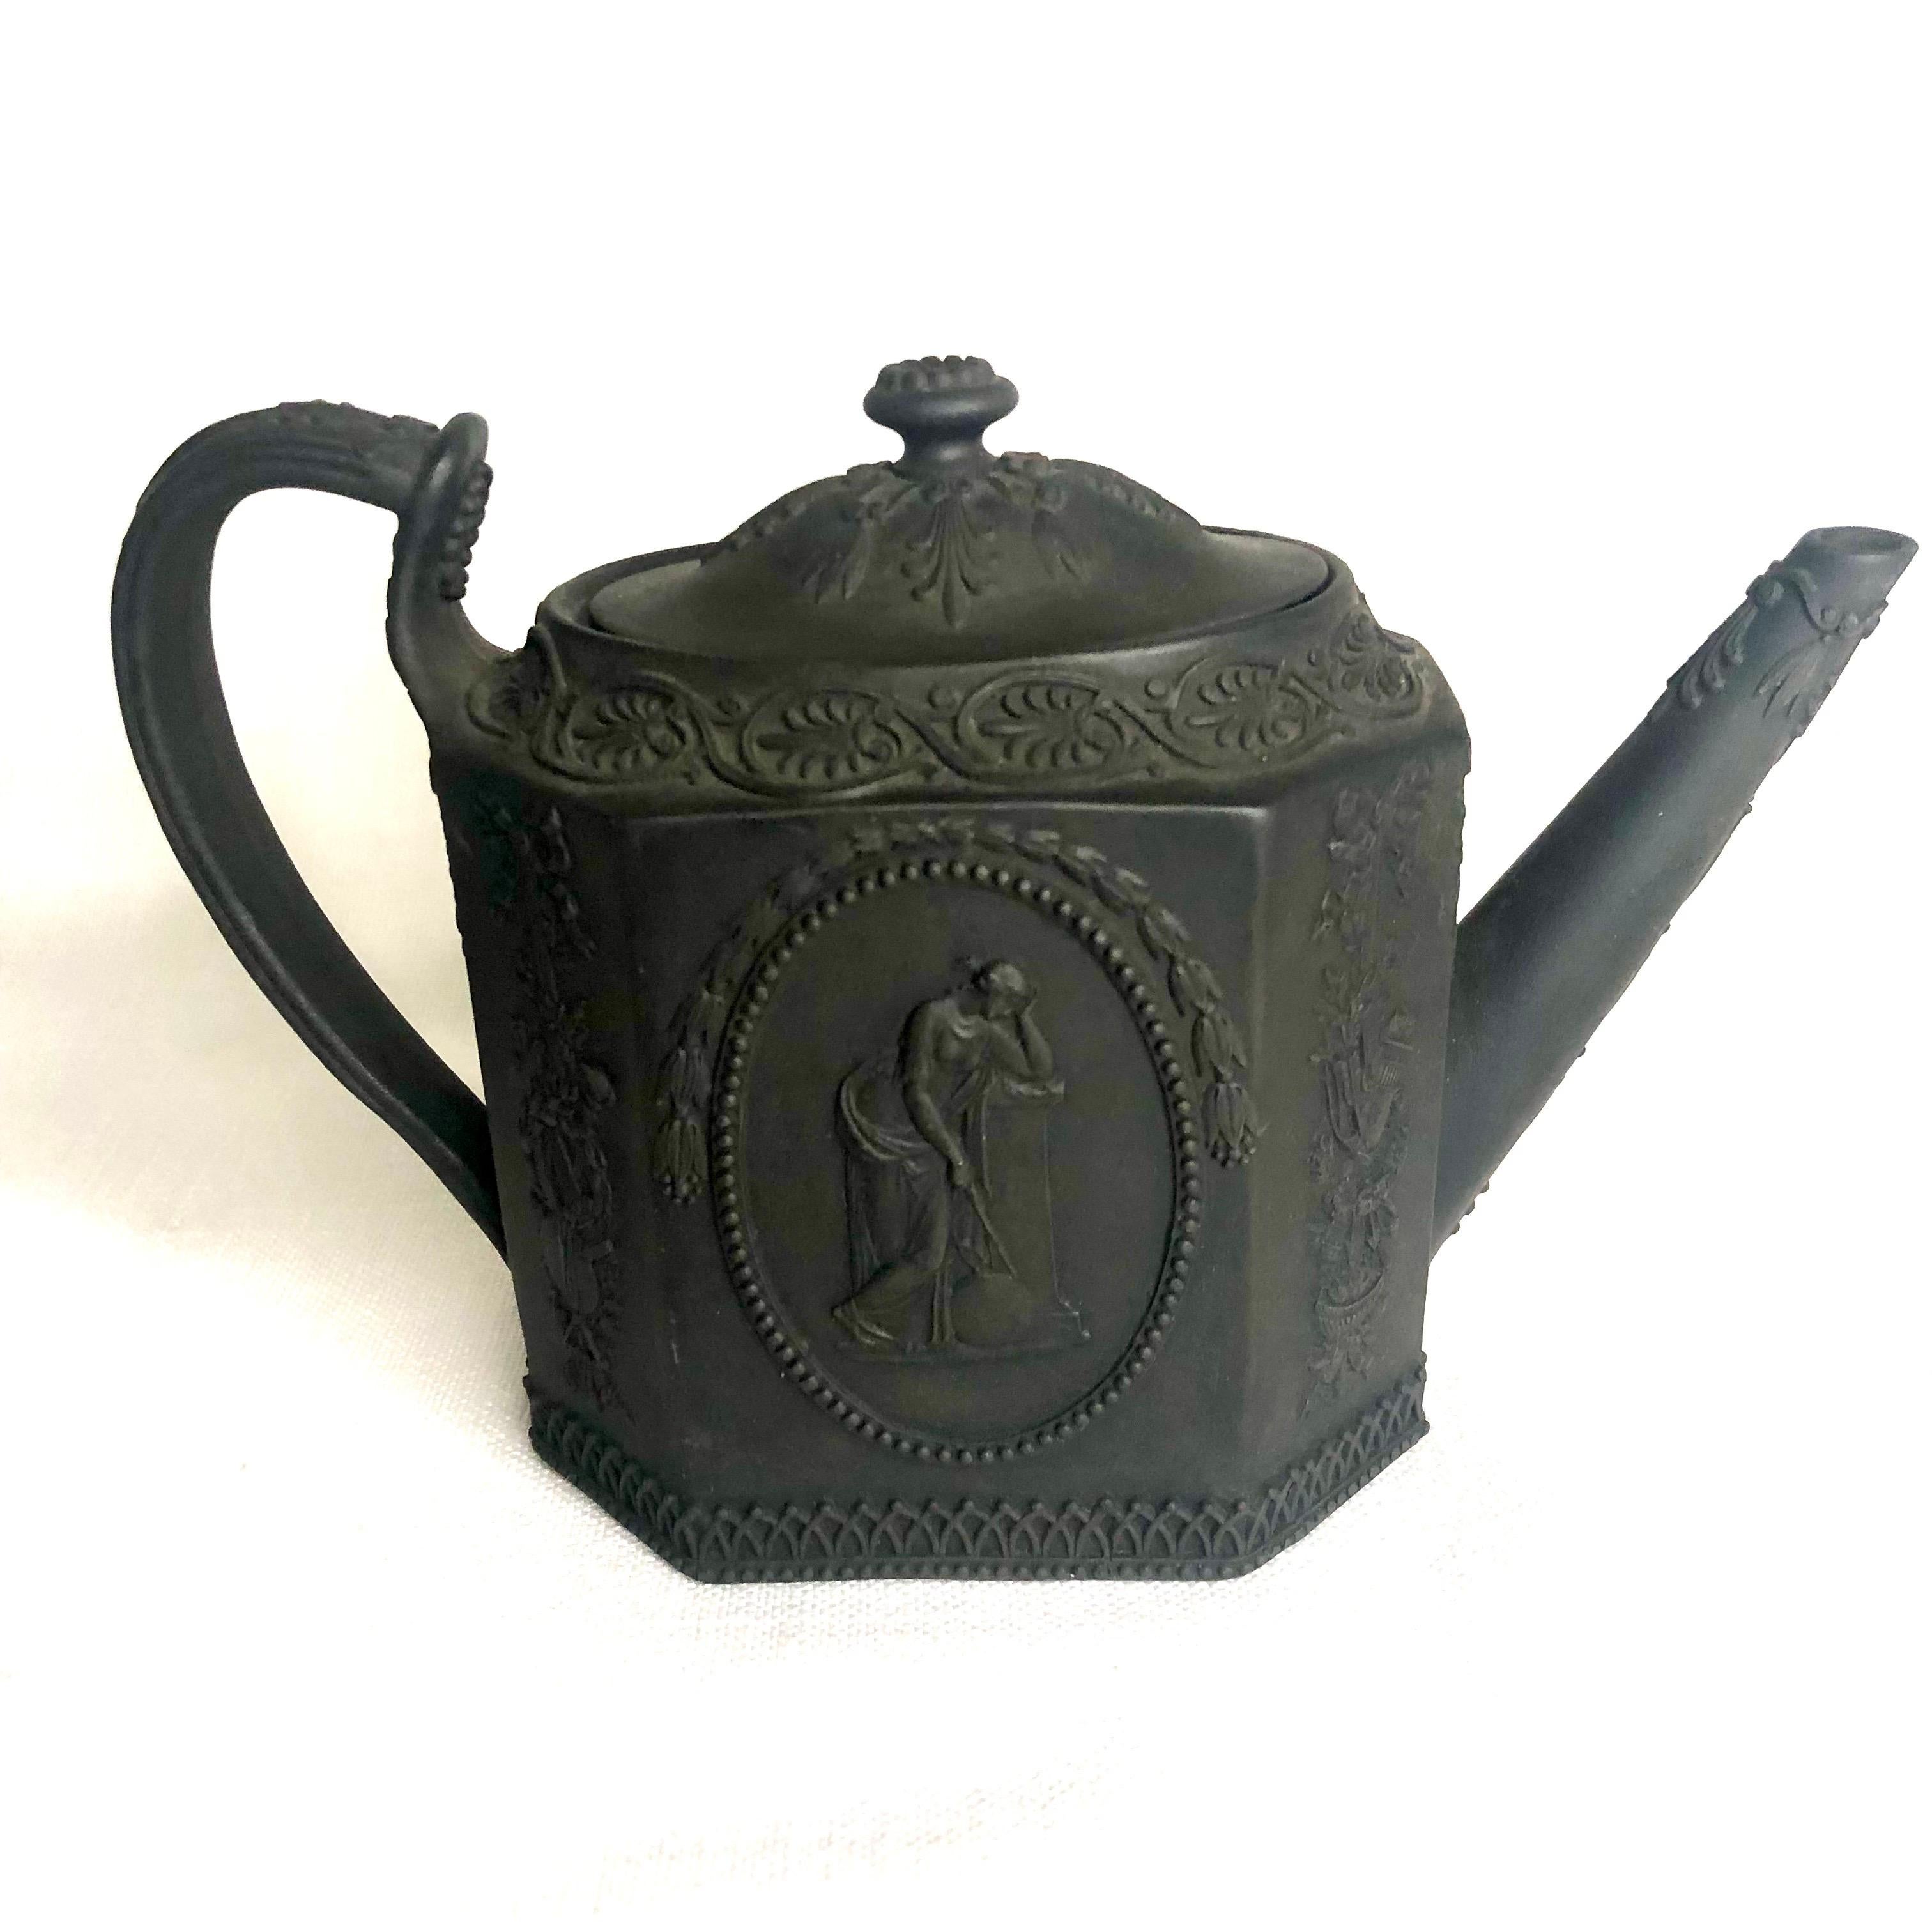 Basalt Wedgwood Teapot with Medallions of Man with Lyre and Lady on Pedestal For Sale 7